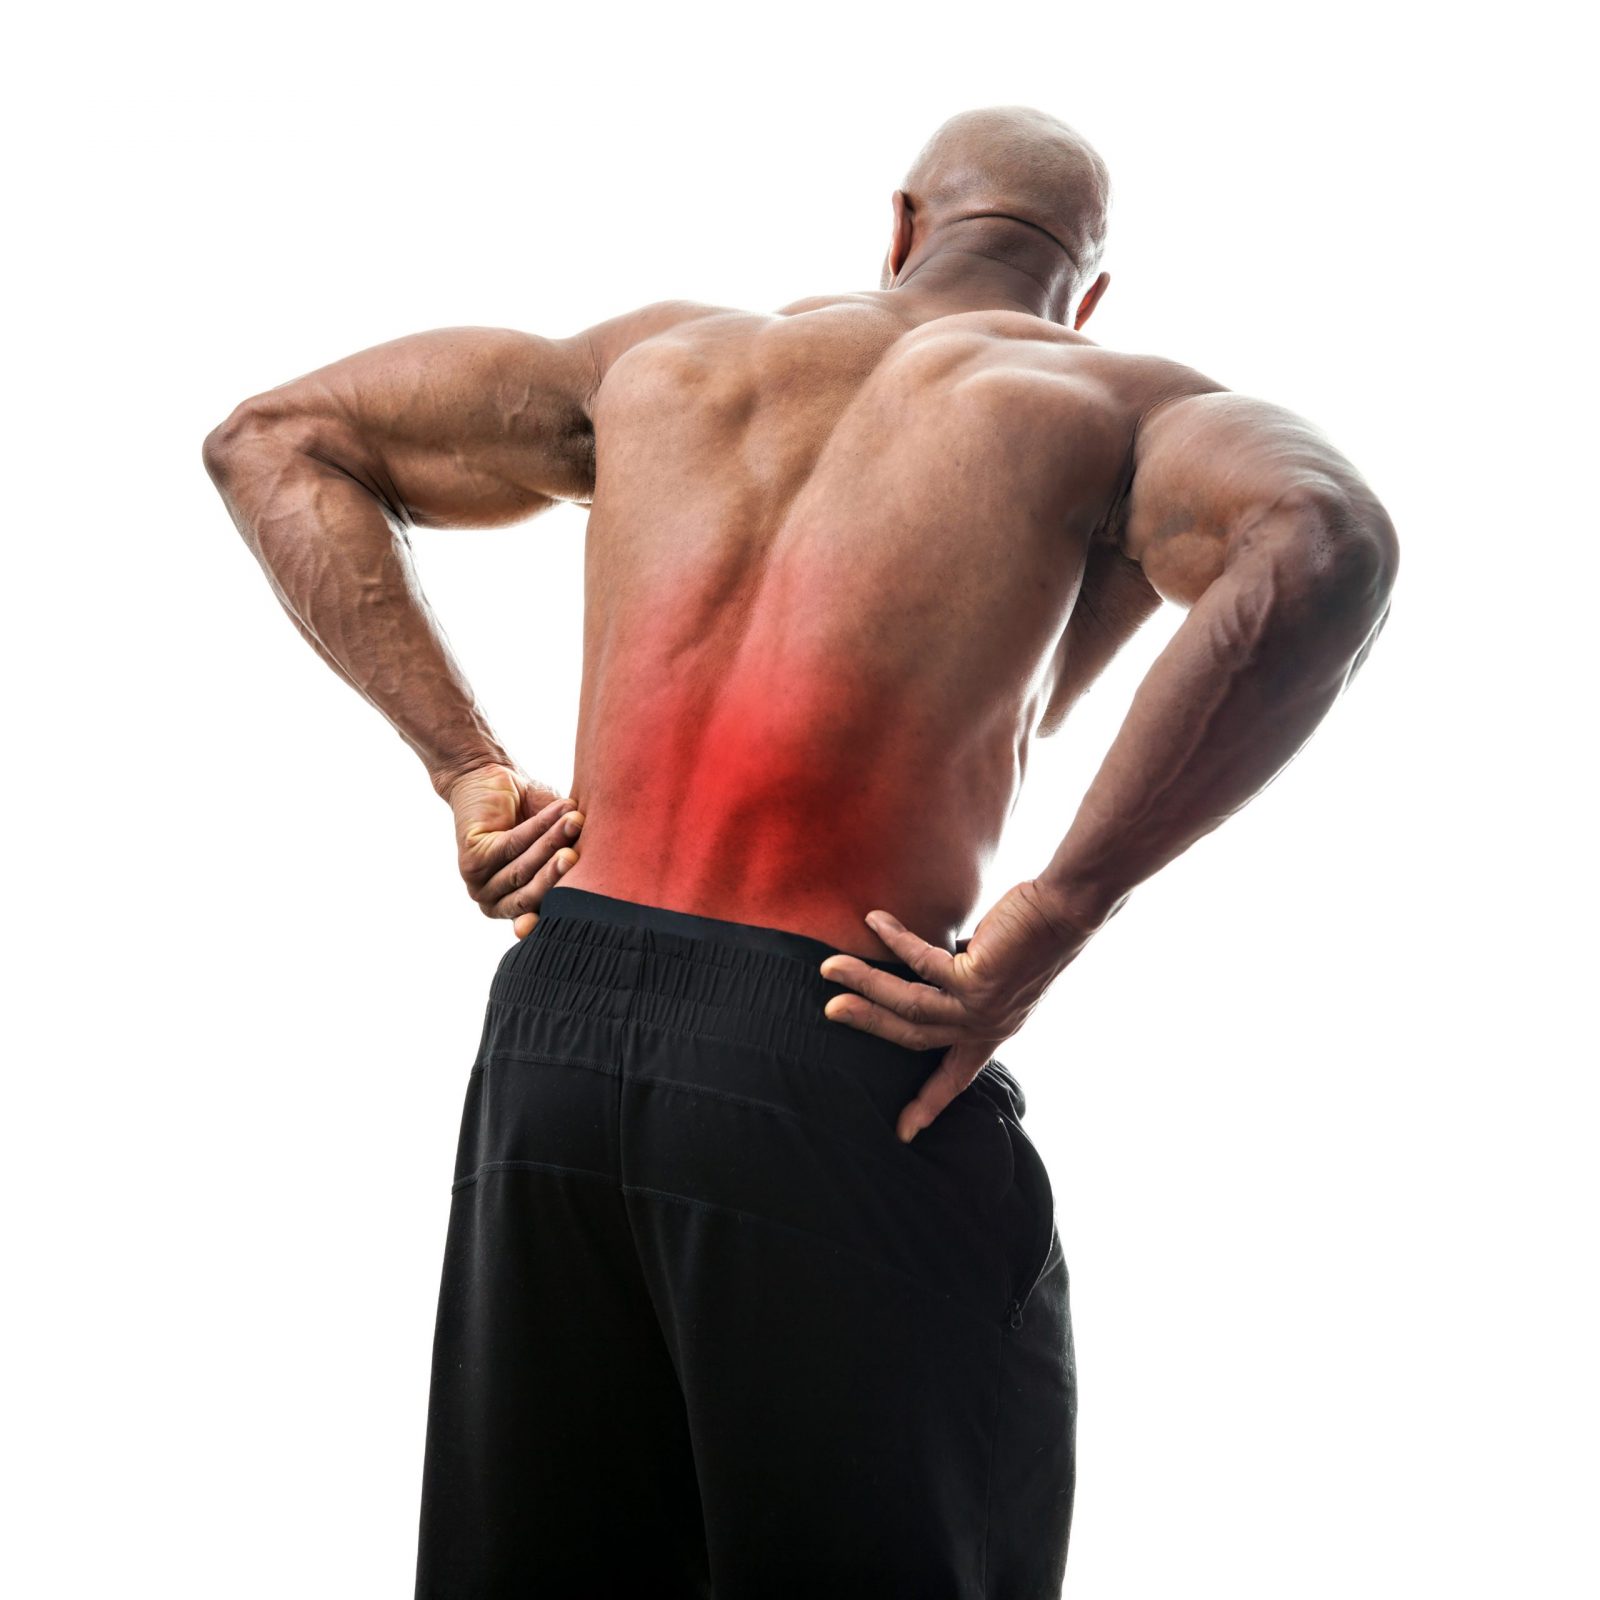 Muscular Low Back Pain, Sydney Physiotherapist